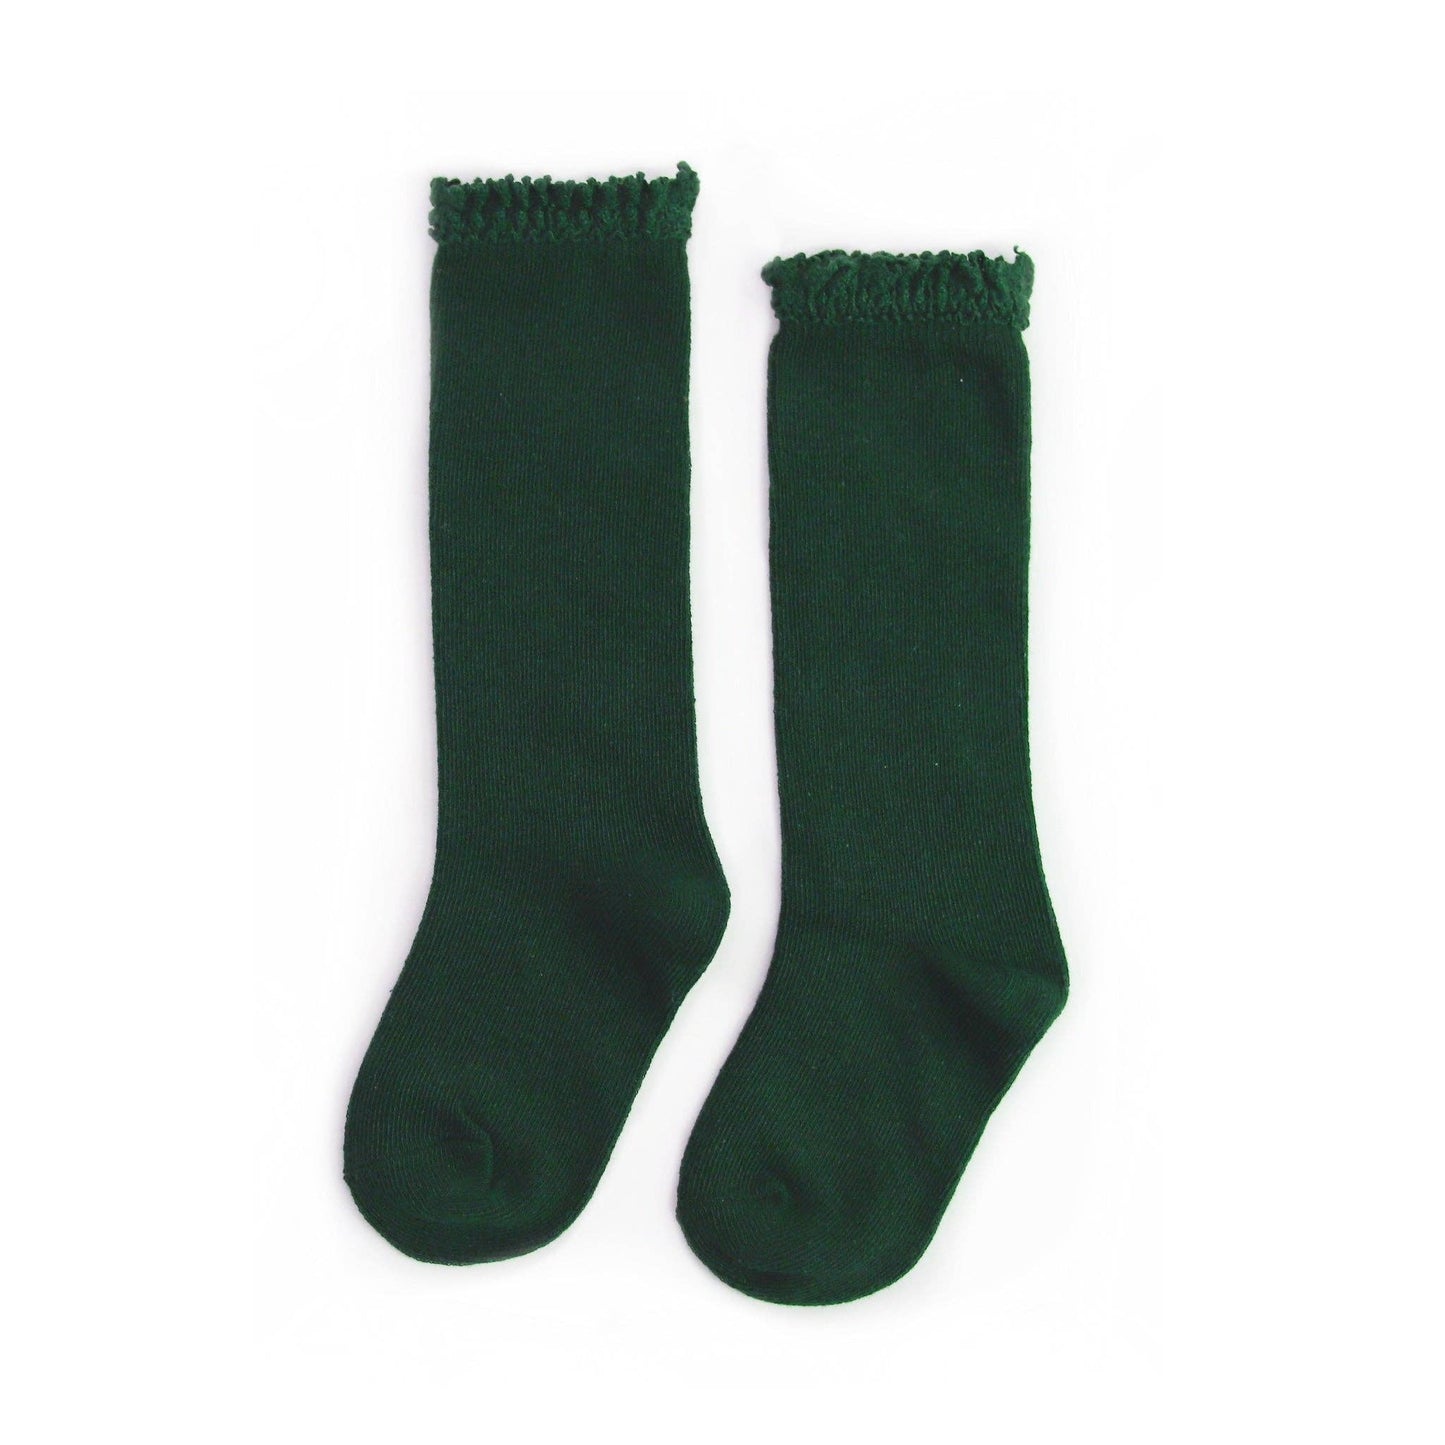 Little Stocking Co. - Forest Lace Top Knee High Socks: 4-6 YEARS